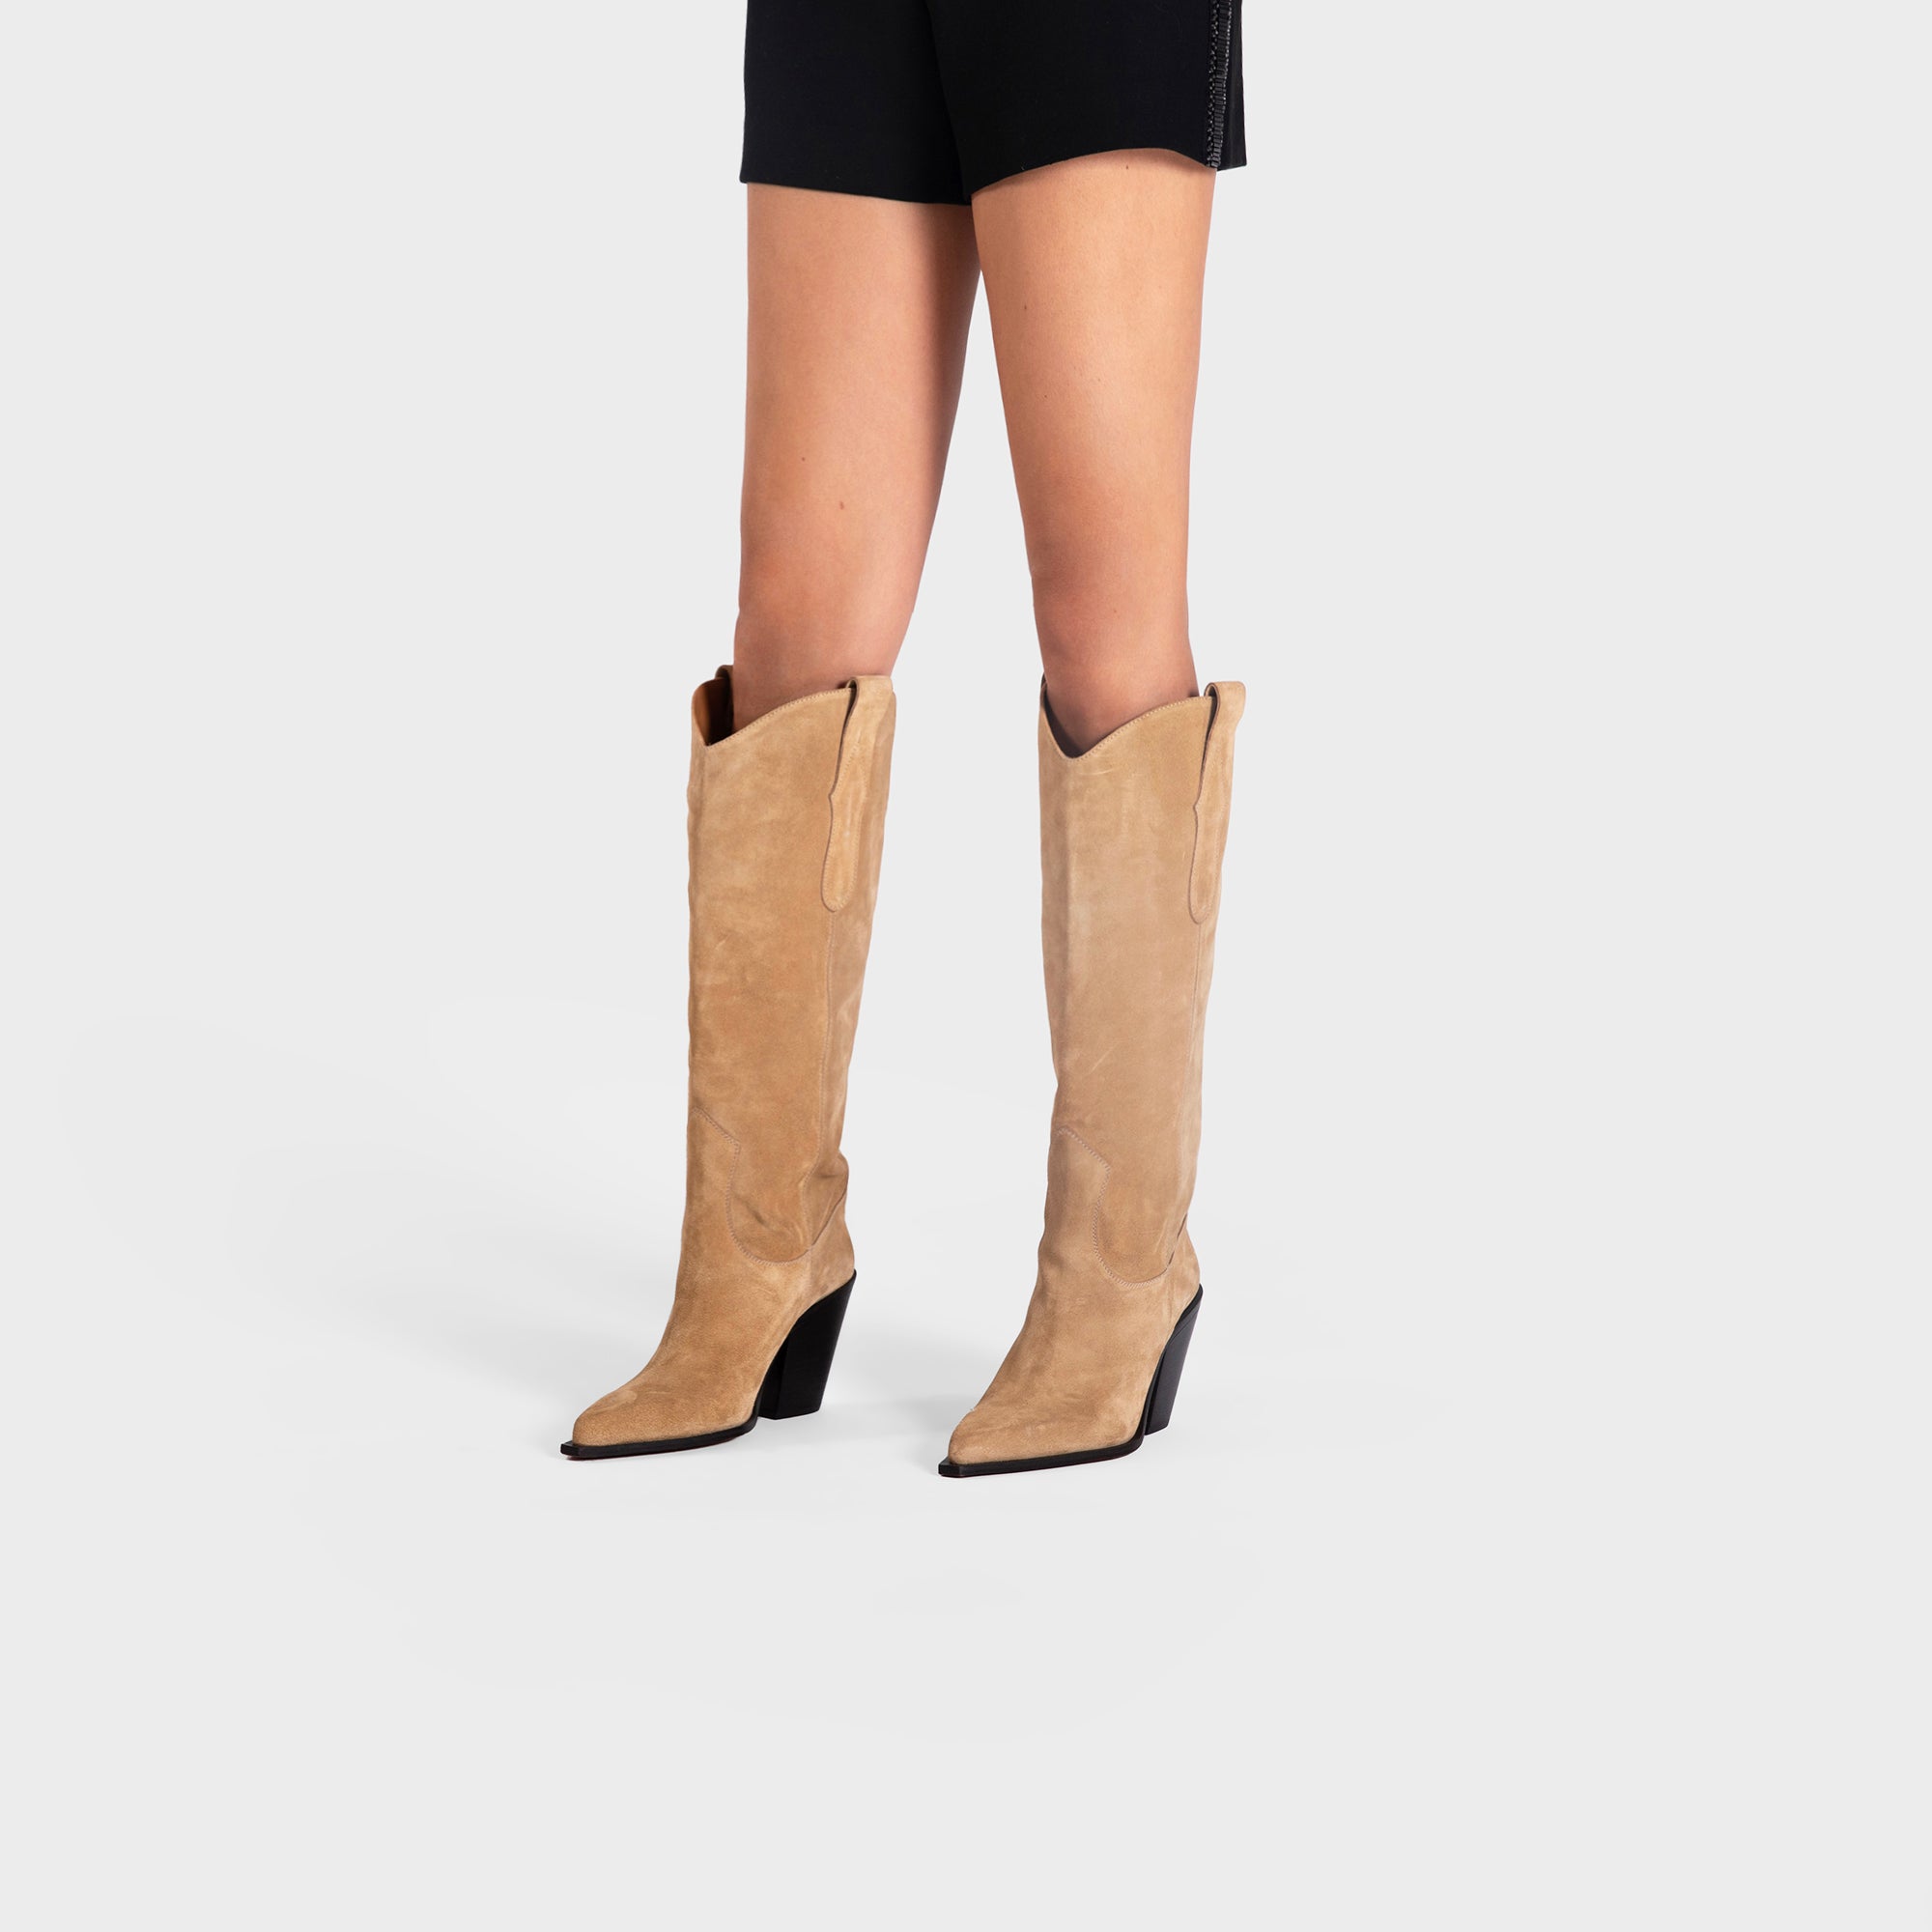 ANA SAND SUEDE TALL BOOTS